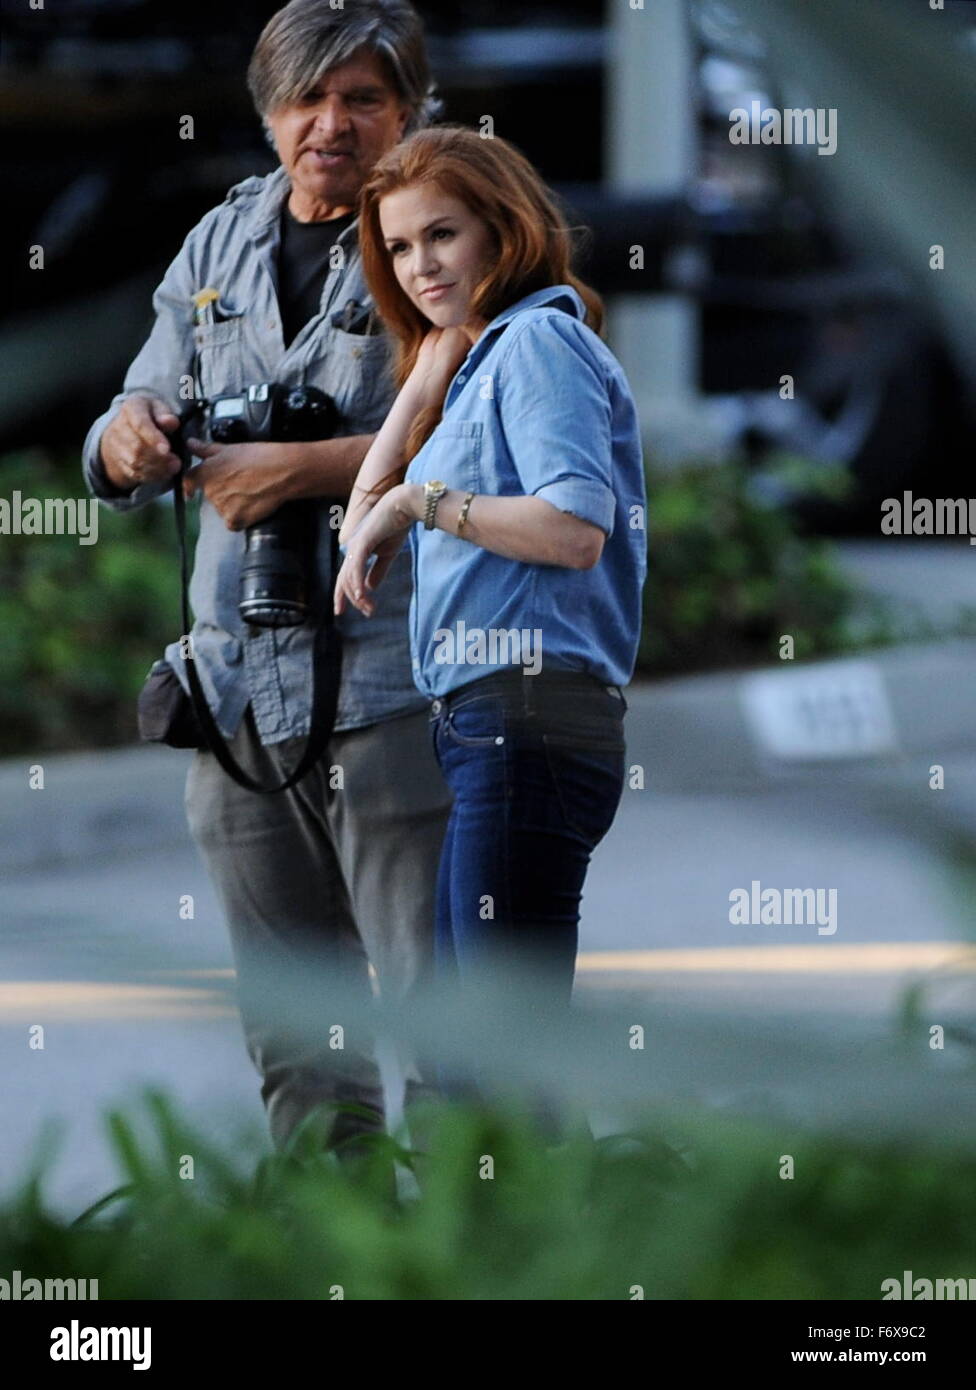 Actress Isla Fisher filming a scene with co star jake gyllenhaal for their  new drama movie 